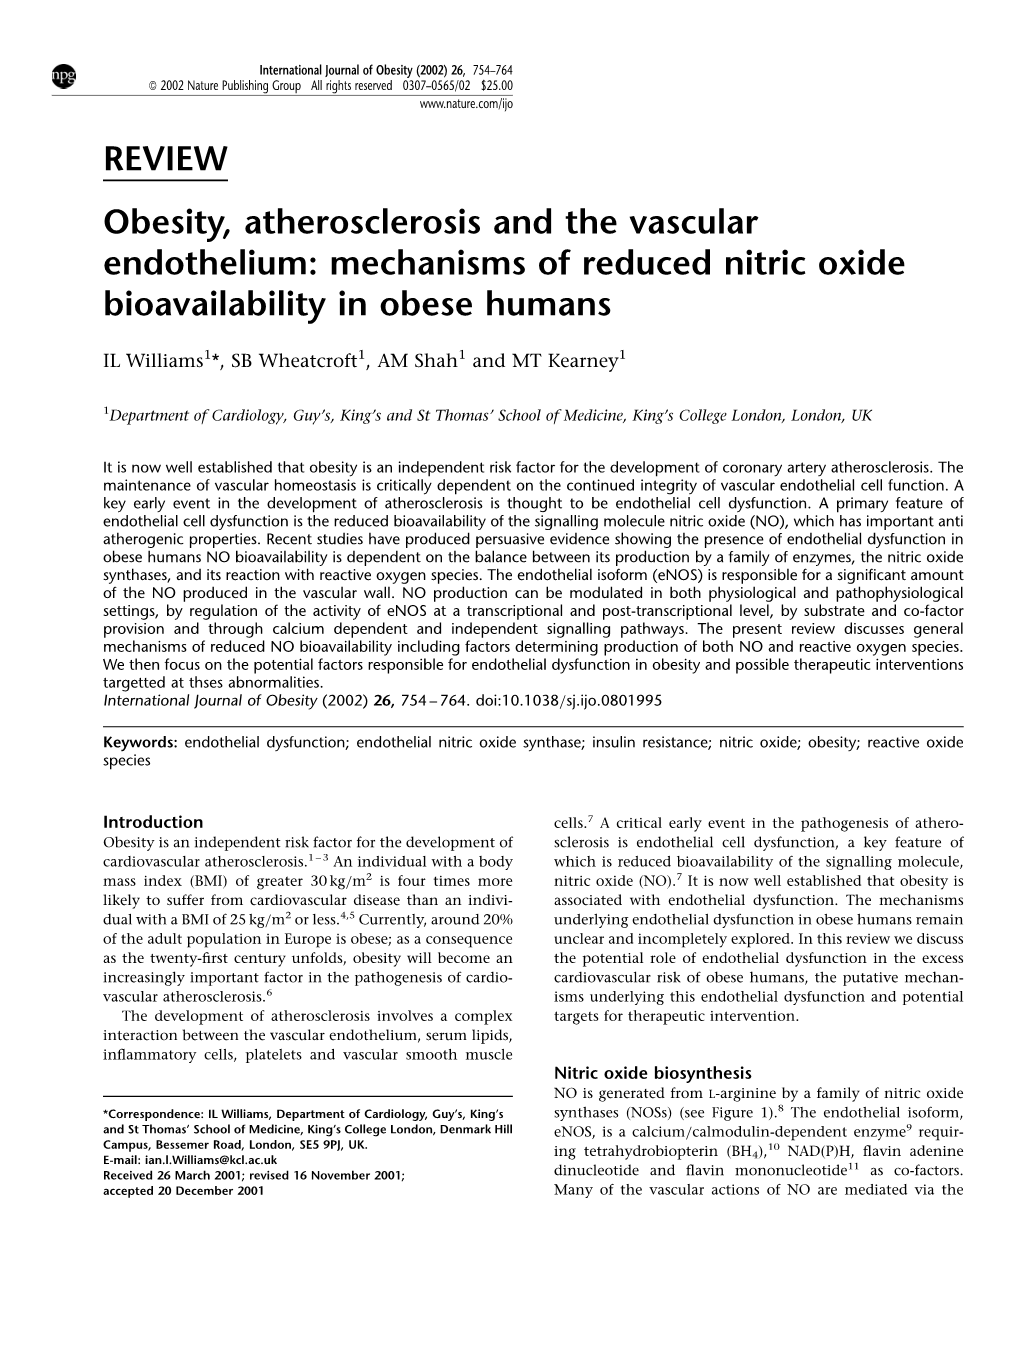 Nitric Oxide Bioavailability in Obese Humans